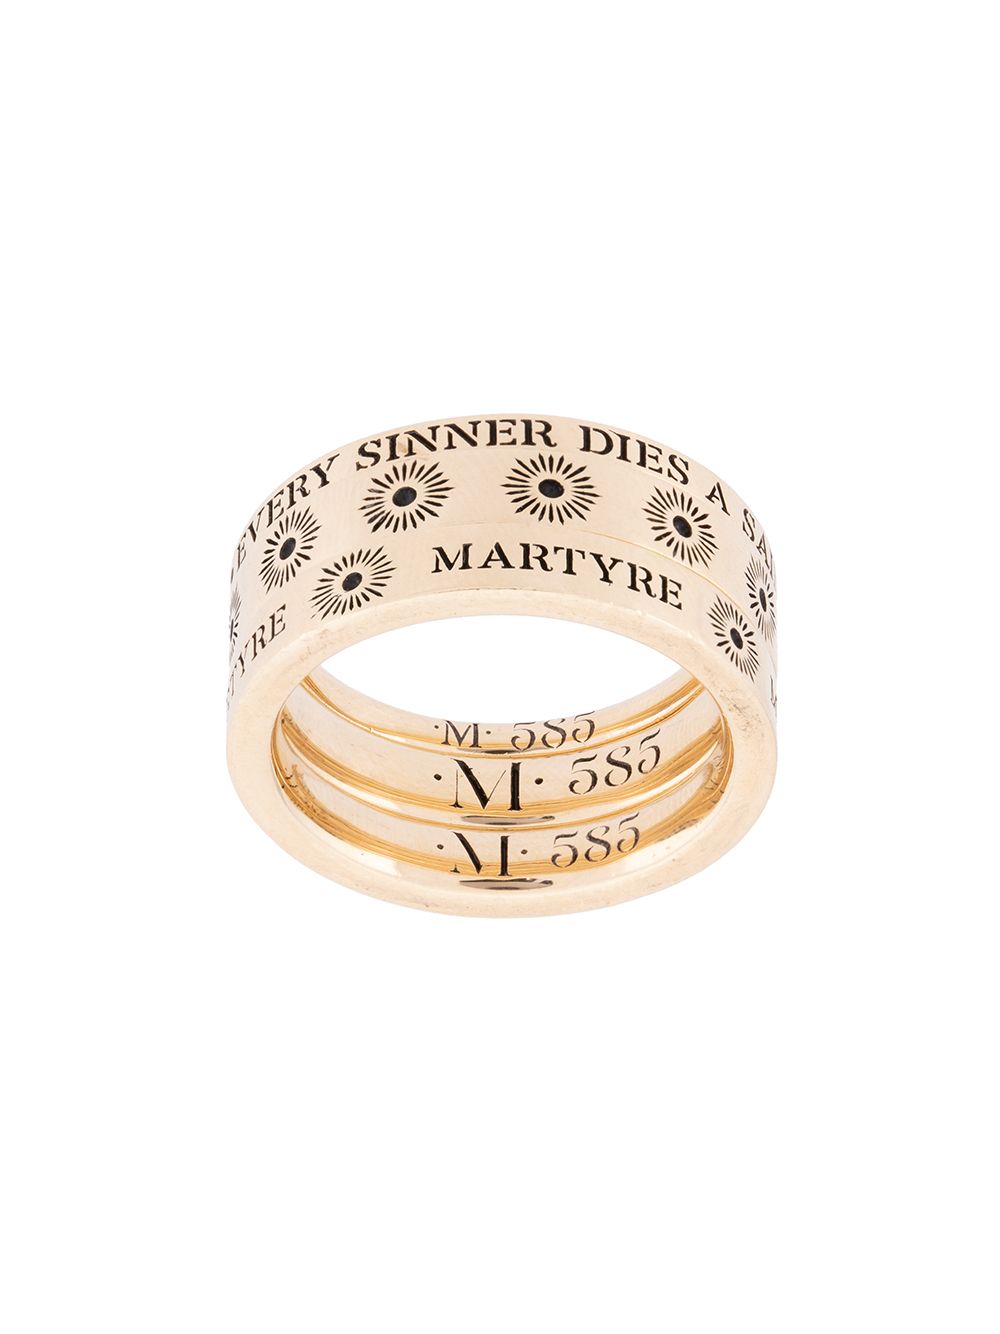 Martyre Sinner Stacking Rings In Gold